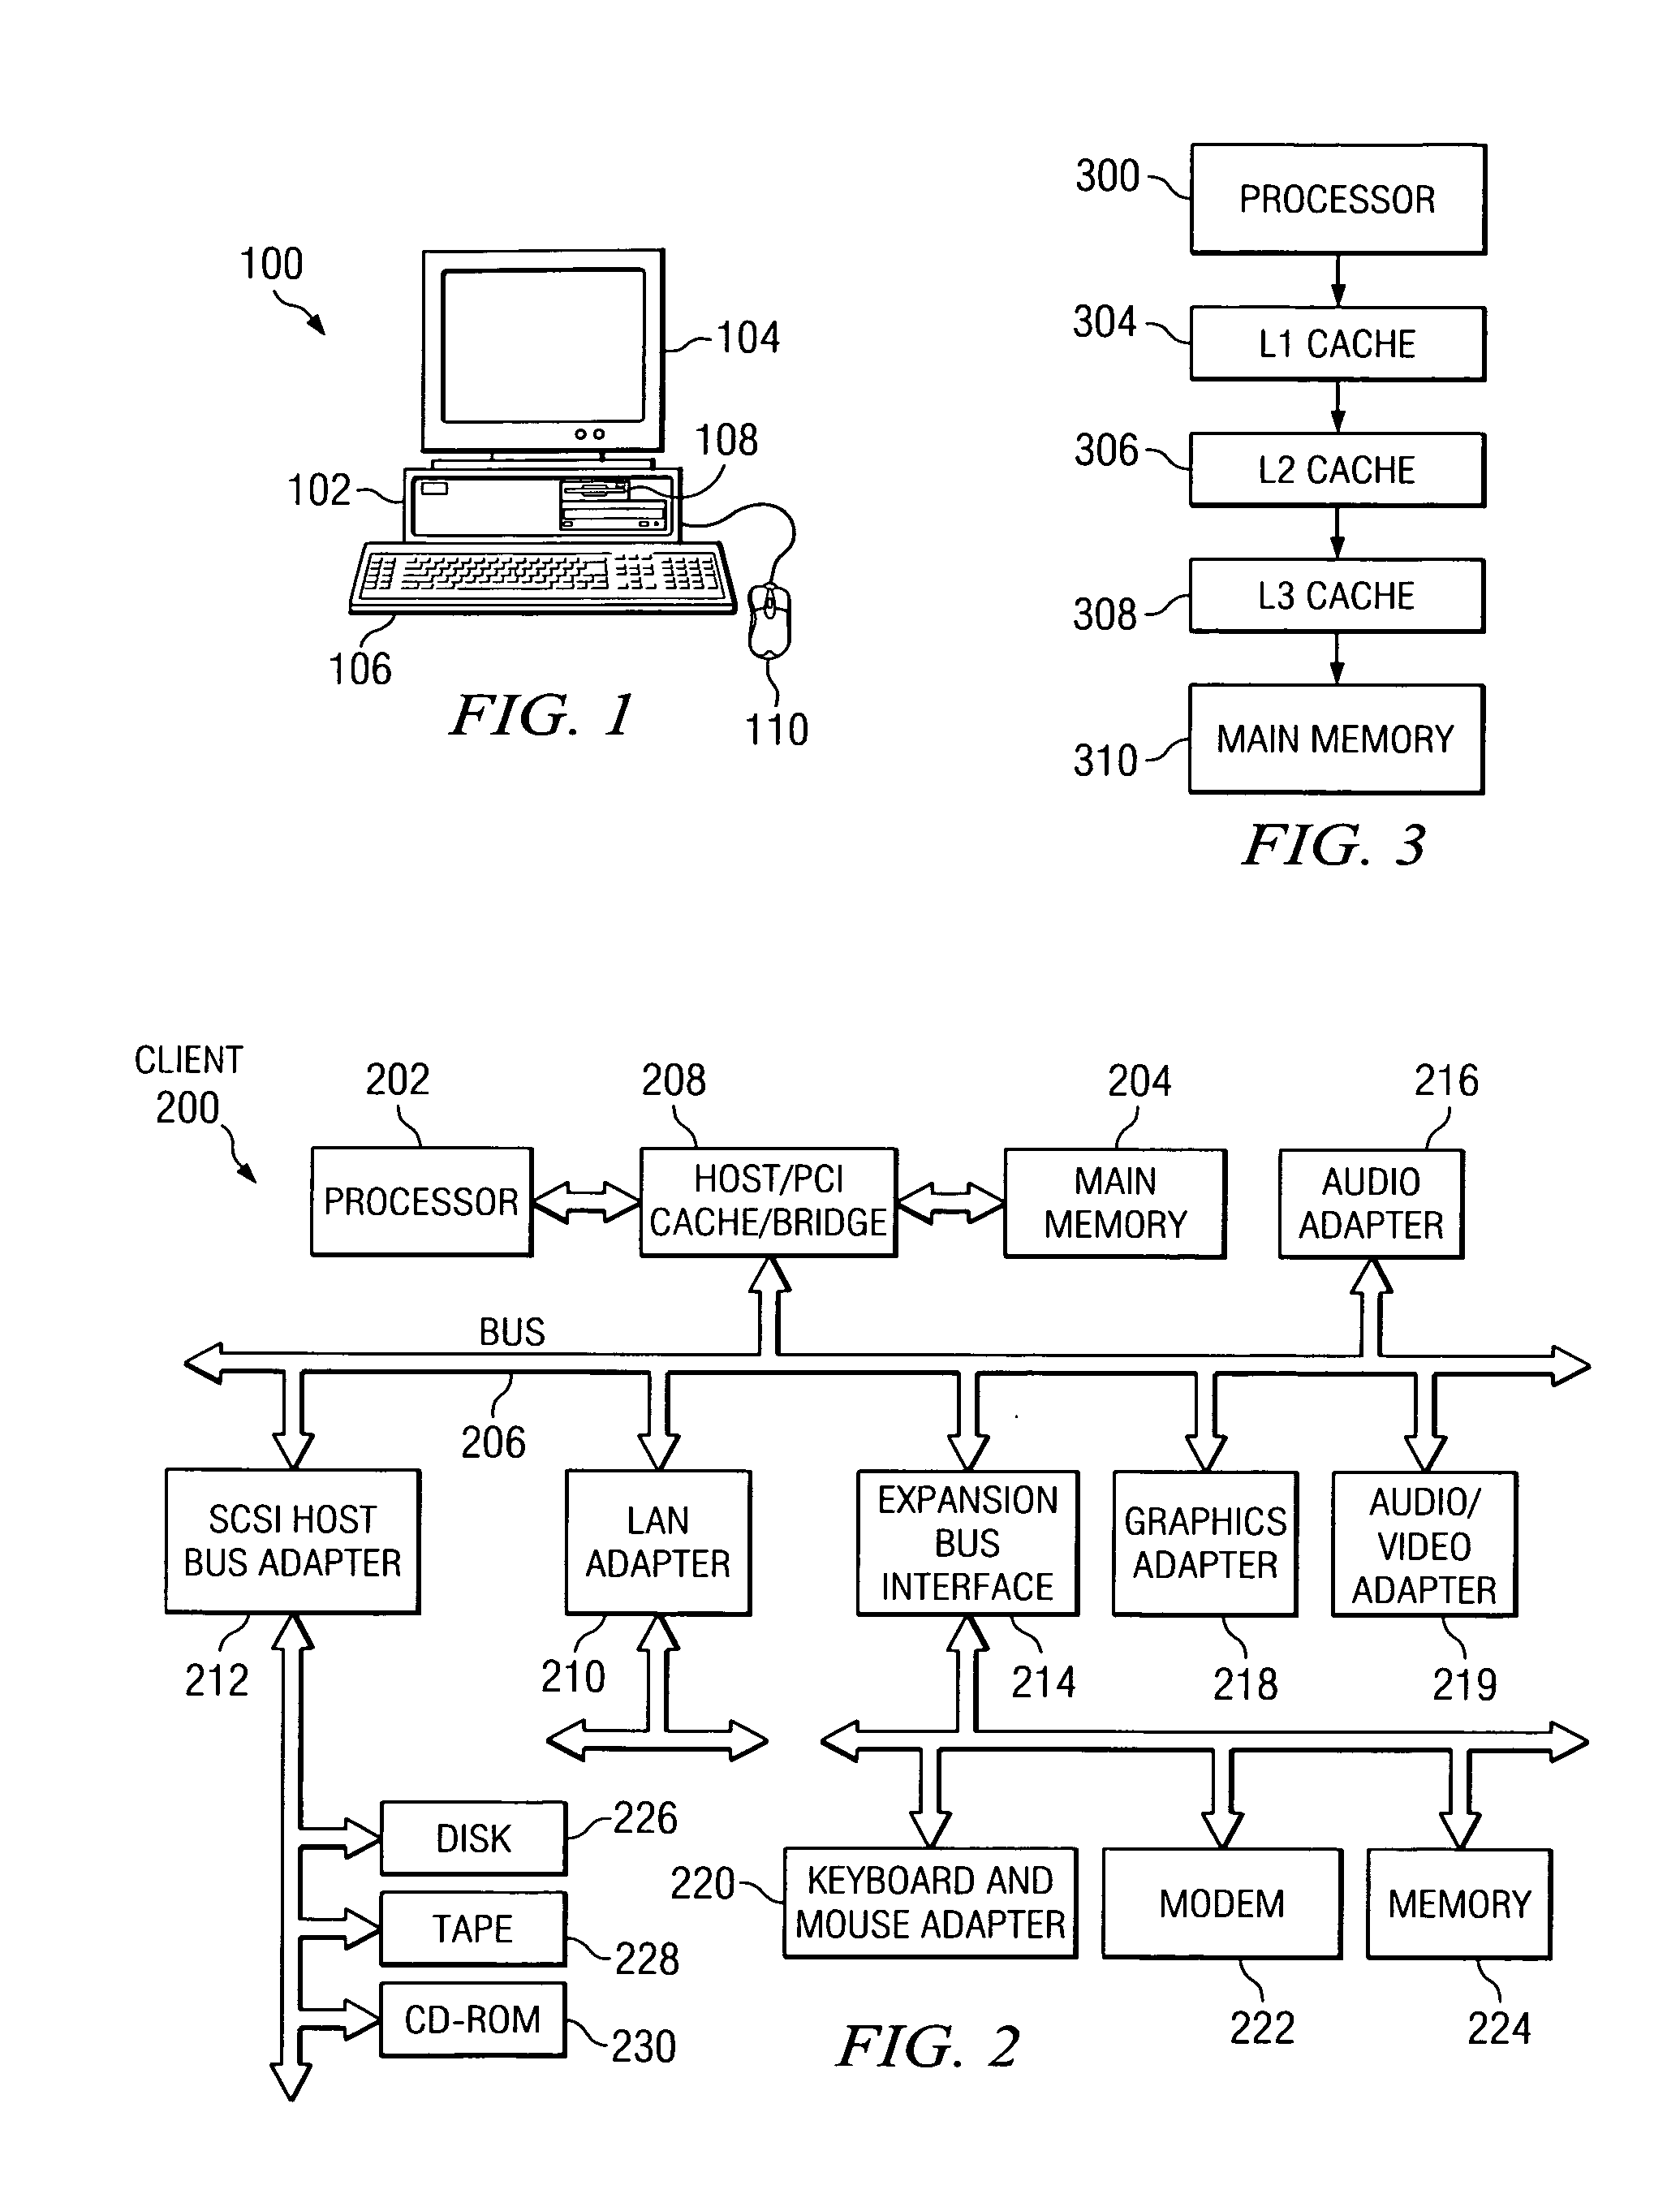 Method and apparatus for a generic language interface to apply loop optimization transformations